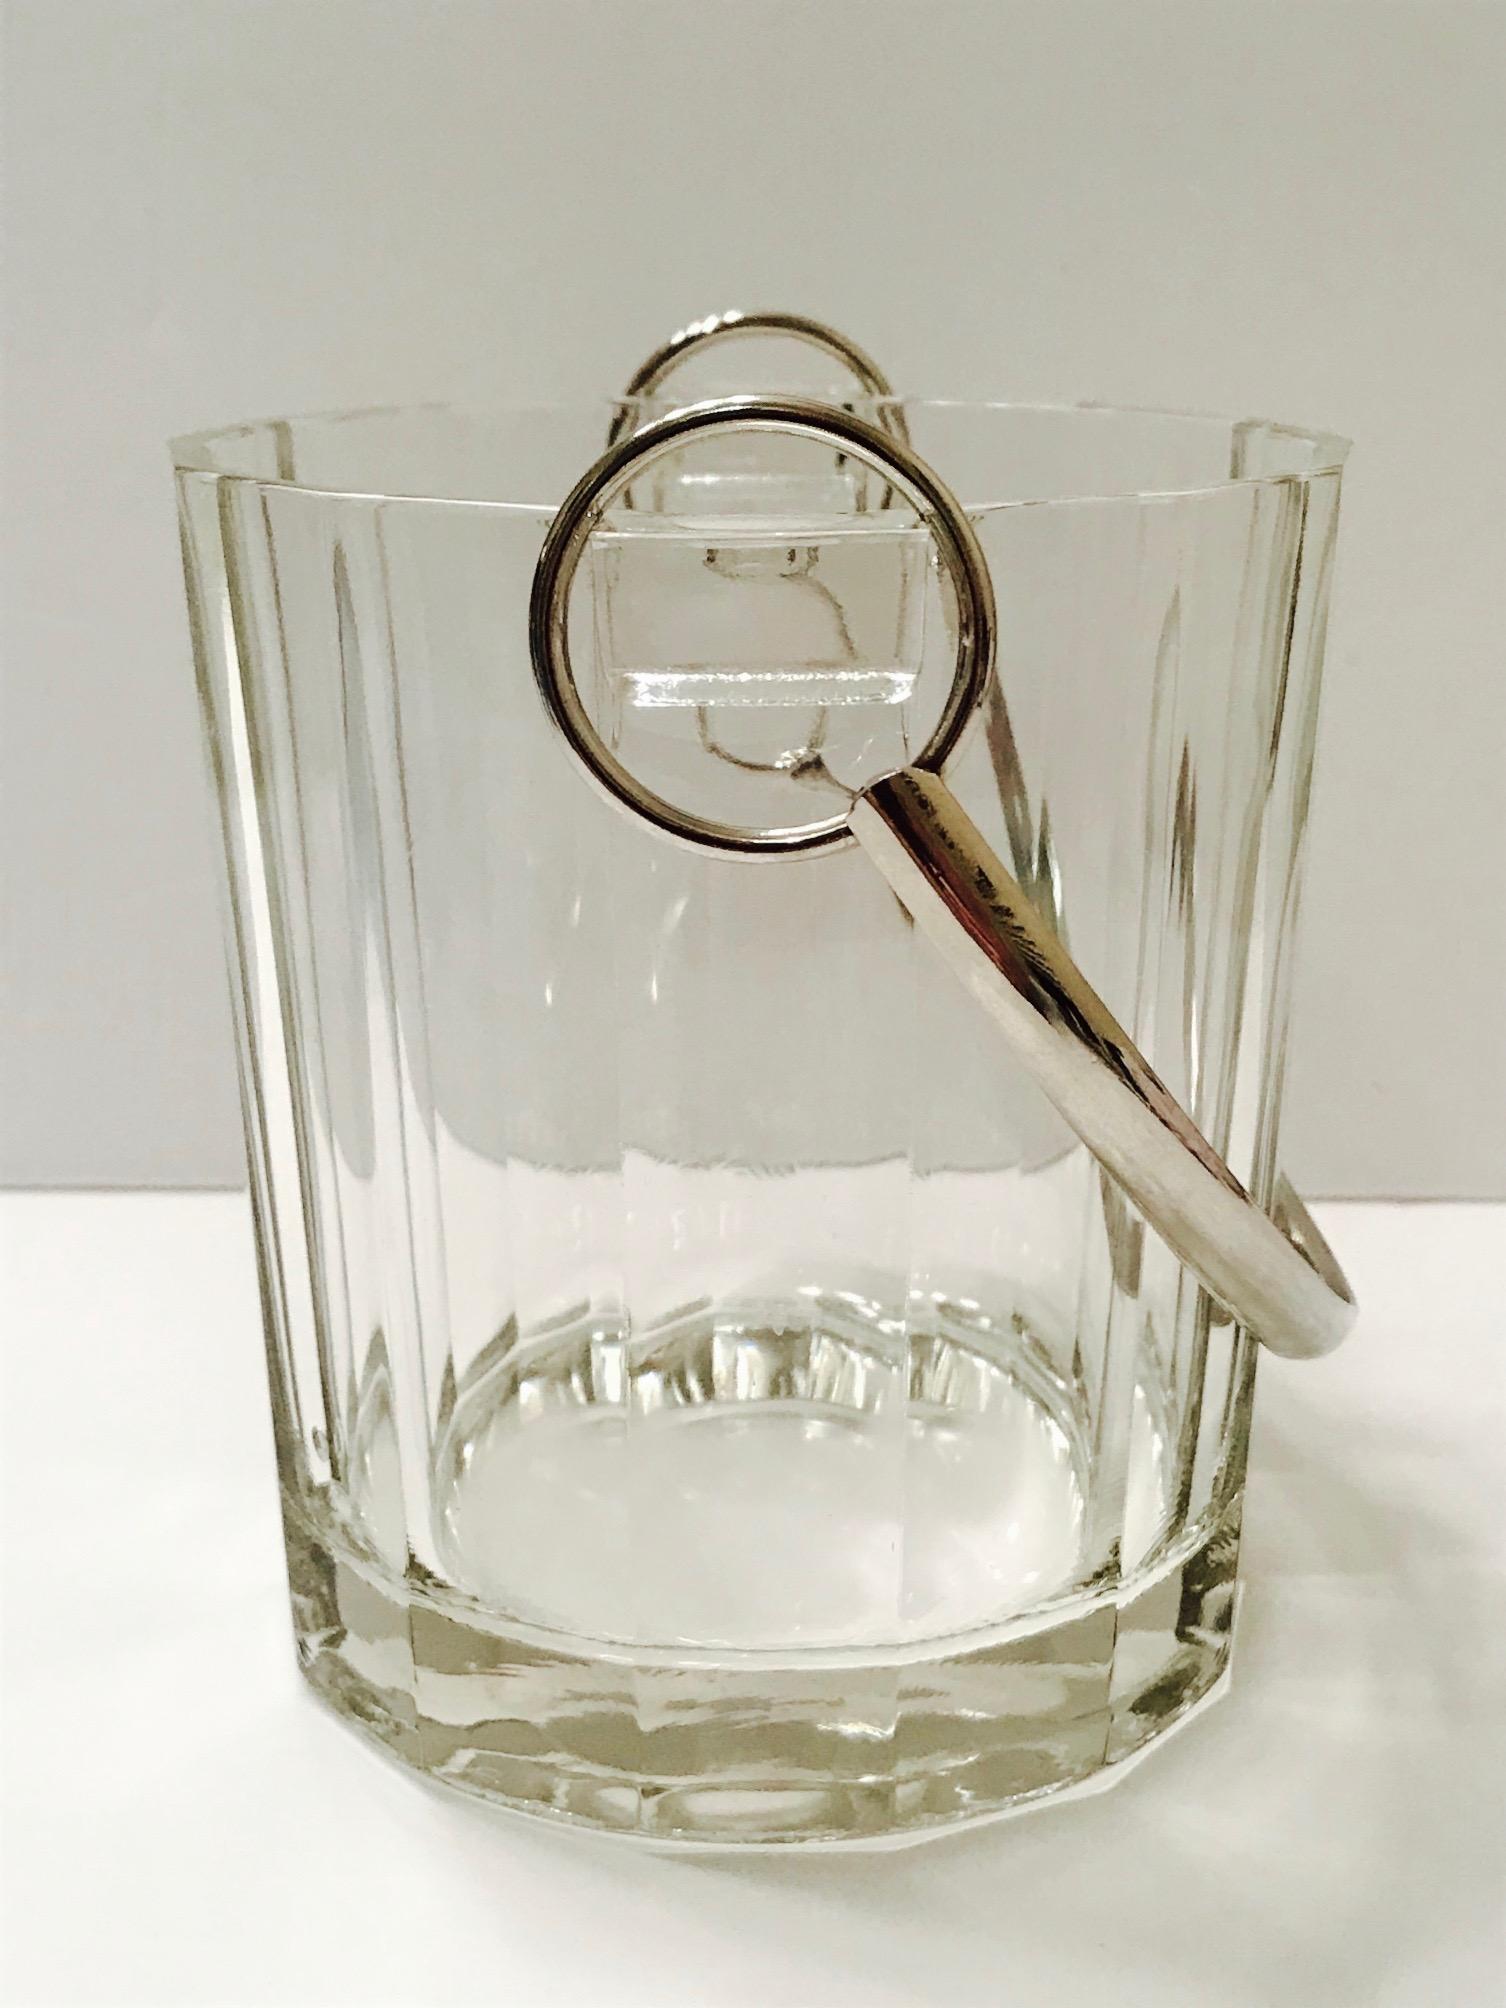 Italian Mid-Century Modern faceted glass ice bucket with blown glass handles and fitted with stylized horse bit handle in polished nickel. Signed ITALY on the underside, see last image.